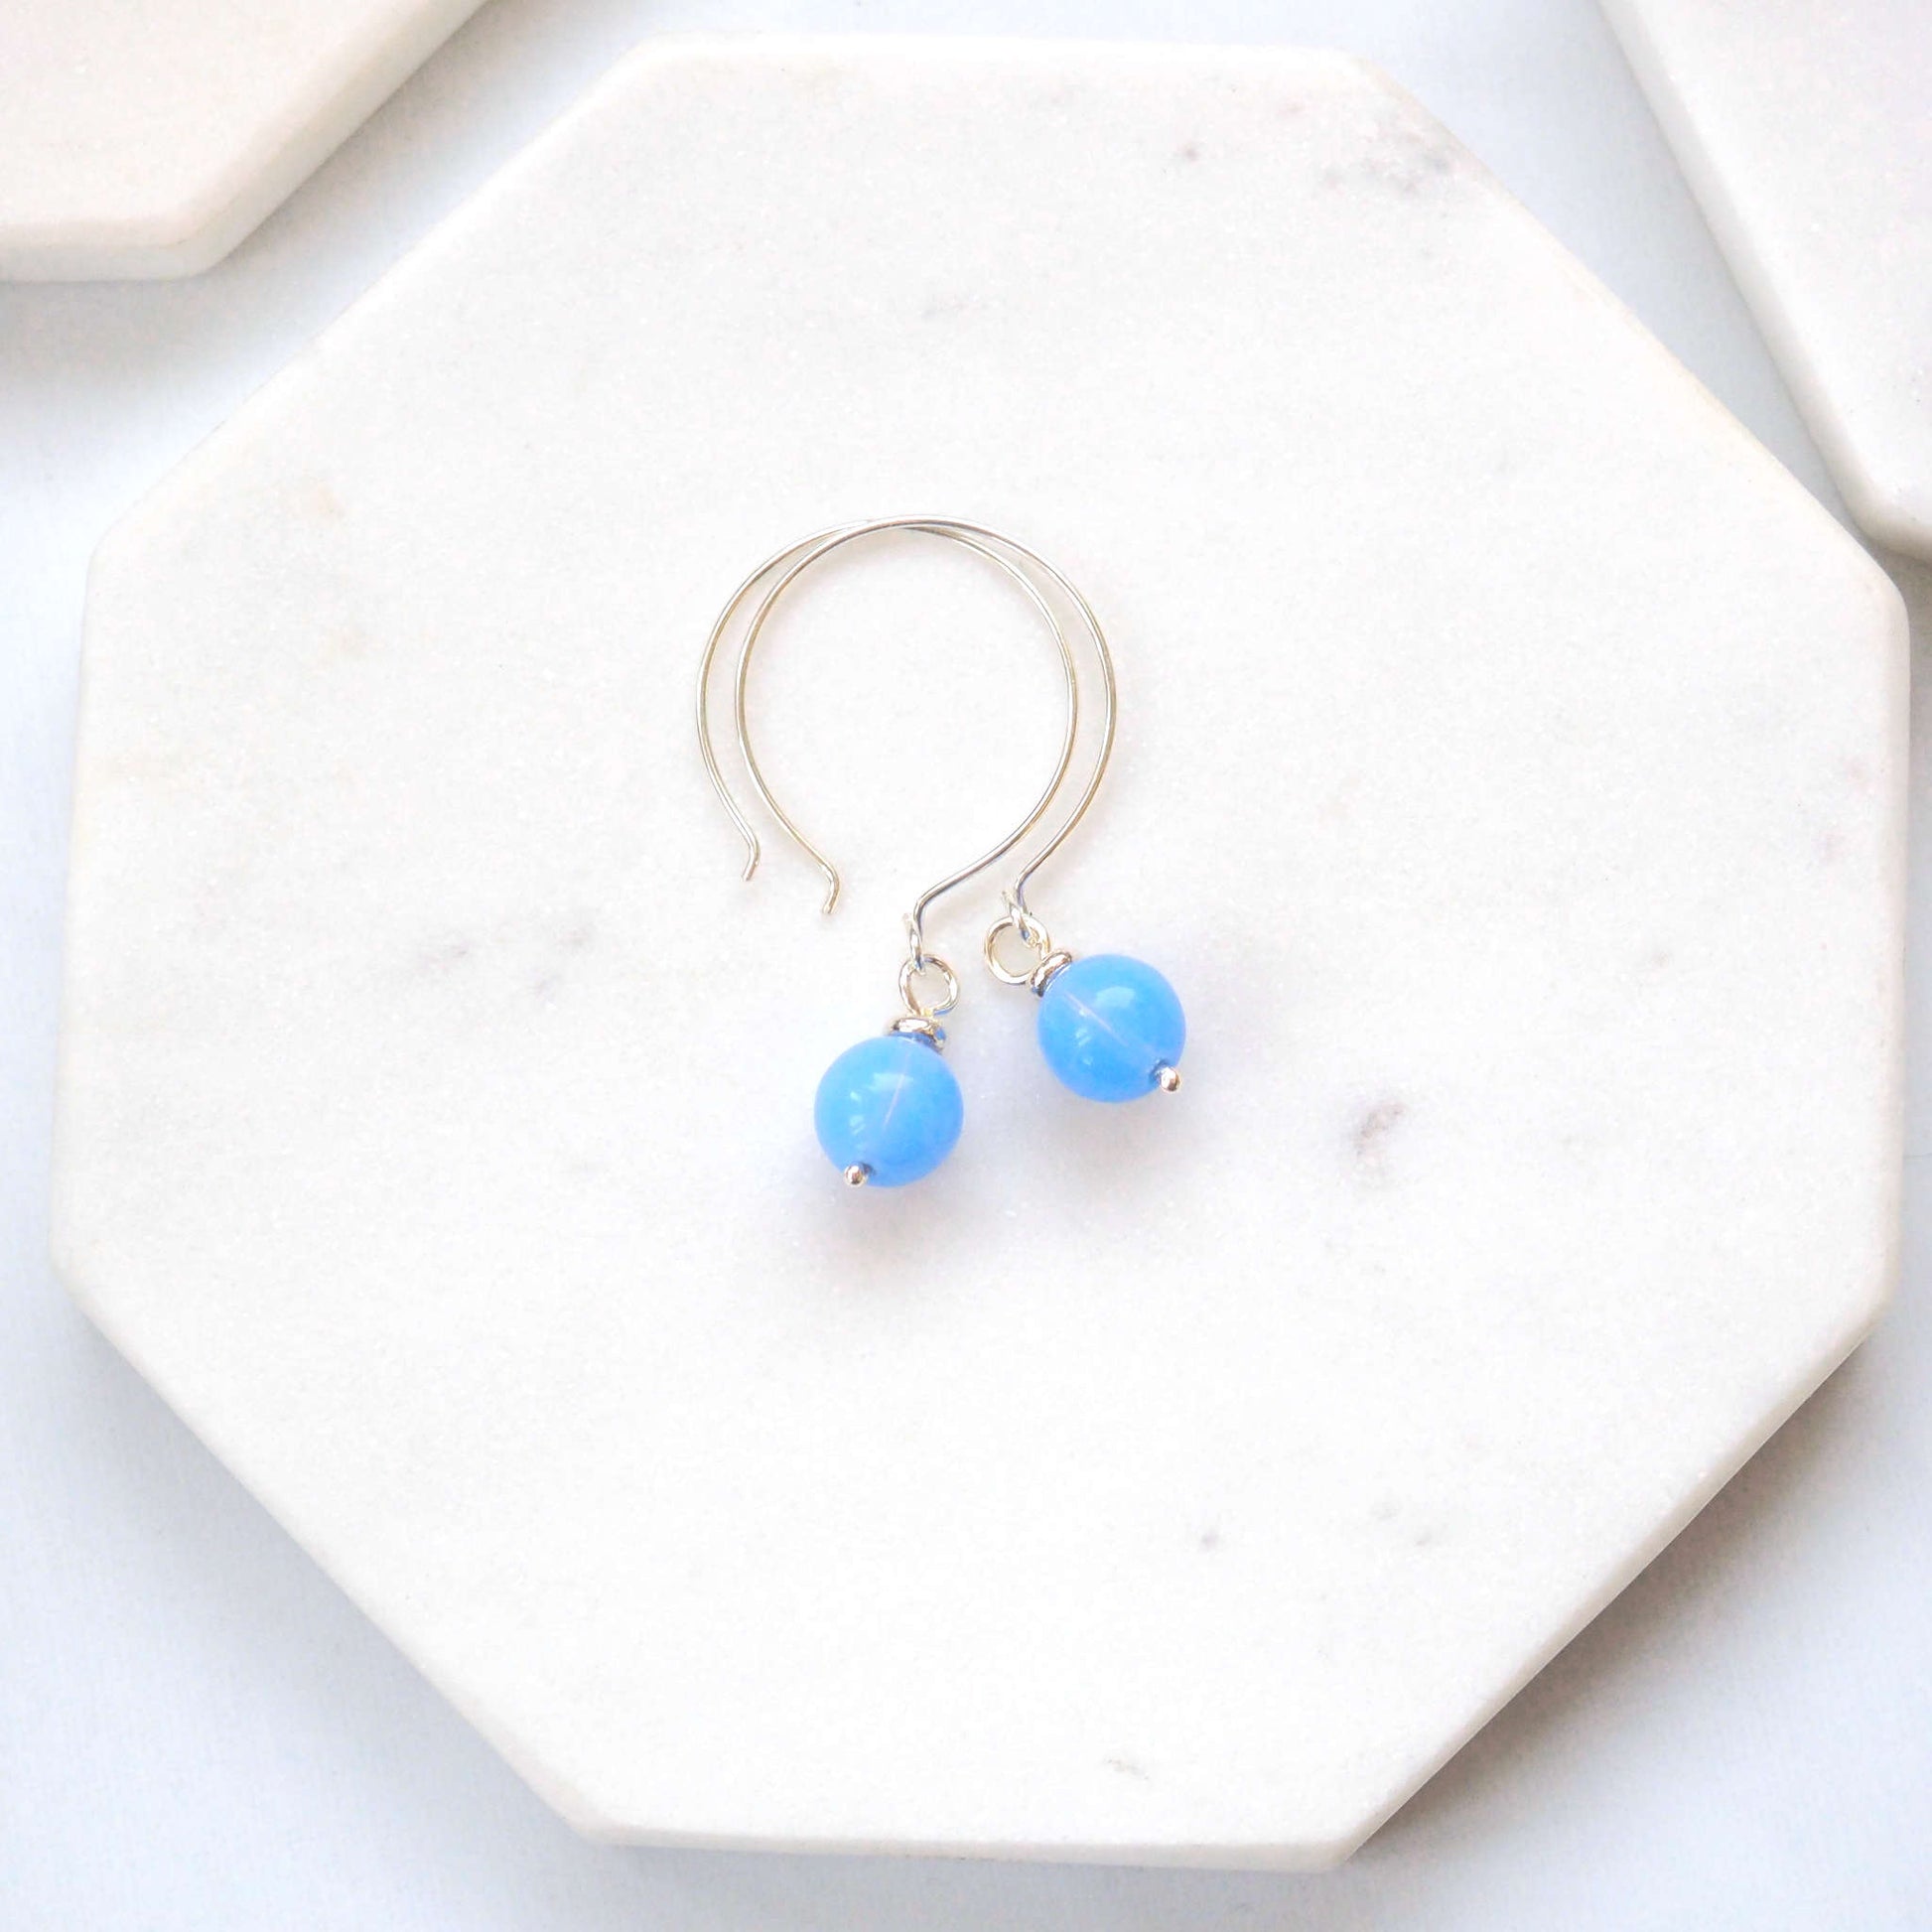 Pale baby blue Silver minimalist handmade silver hoops. Handcrafted ear wires with a round glass bead dropper. Made in Scotland by maram jewellery